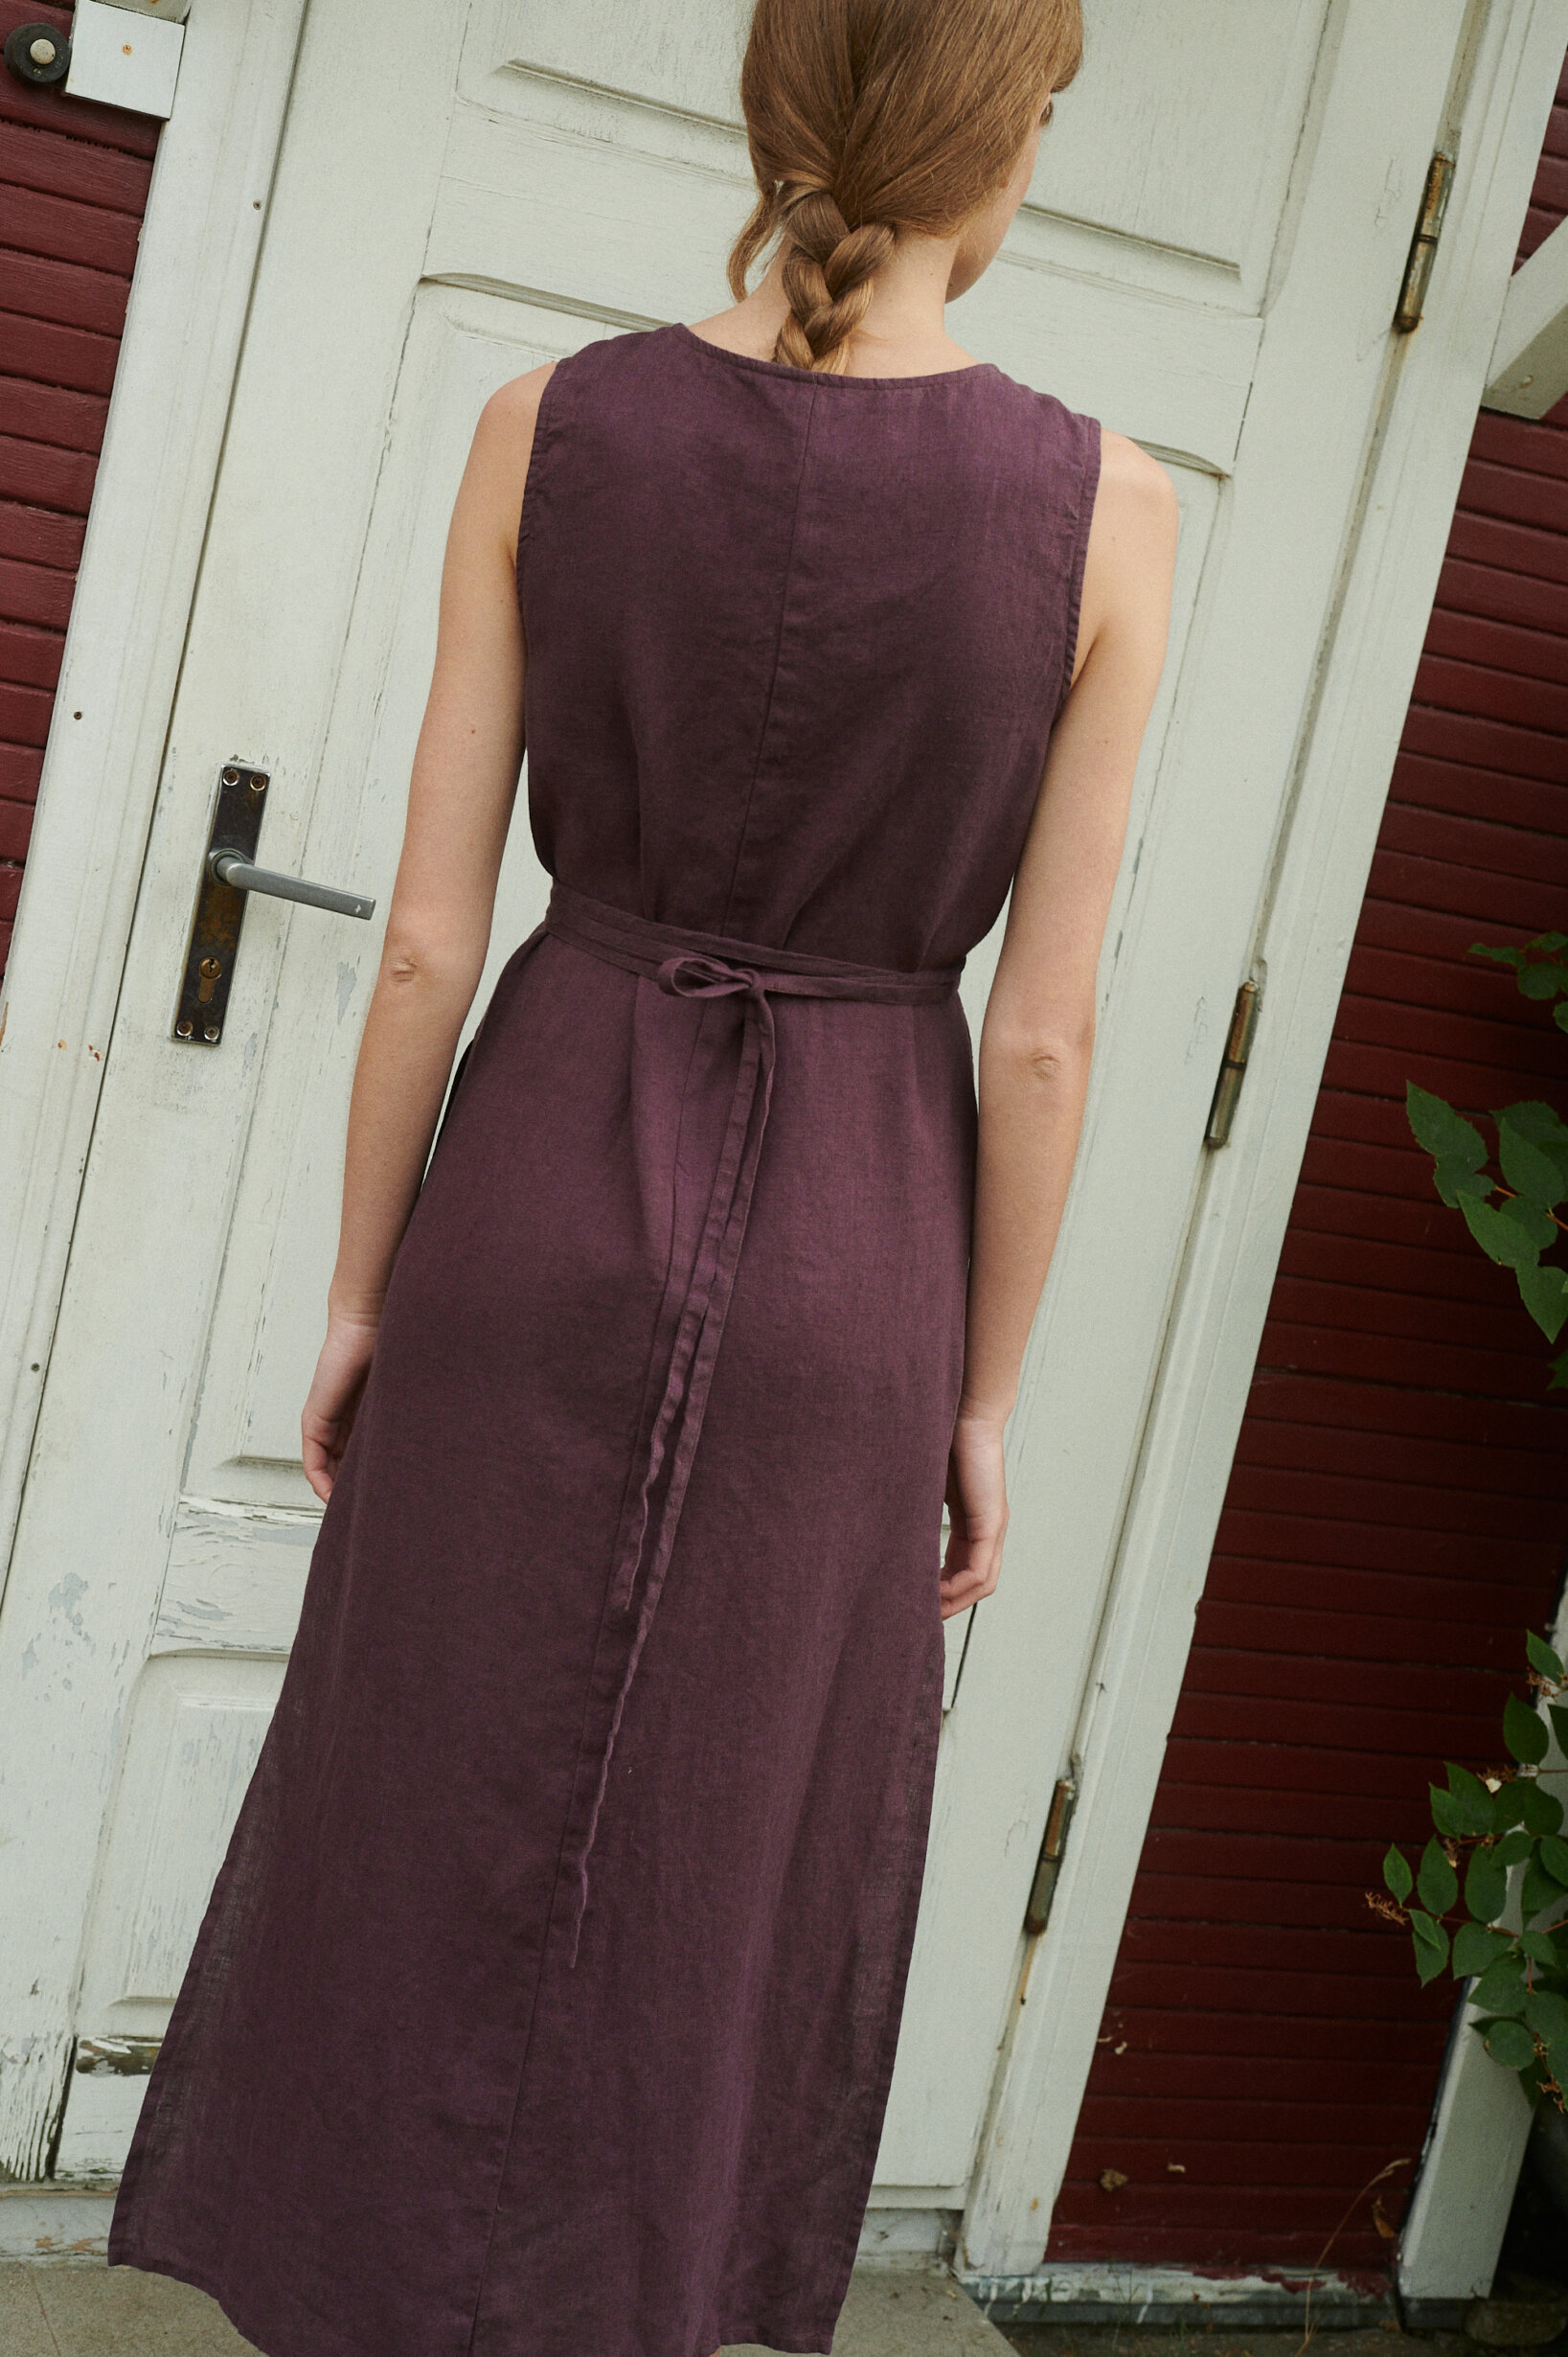 a back view of summer linen wrap dress in eggplant violet near the wide door